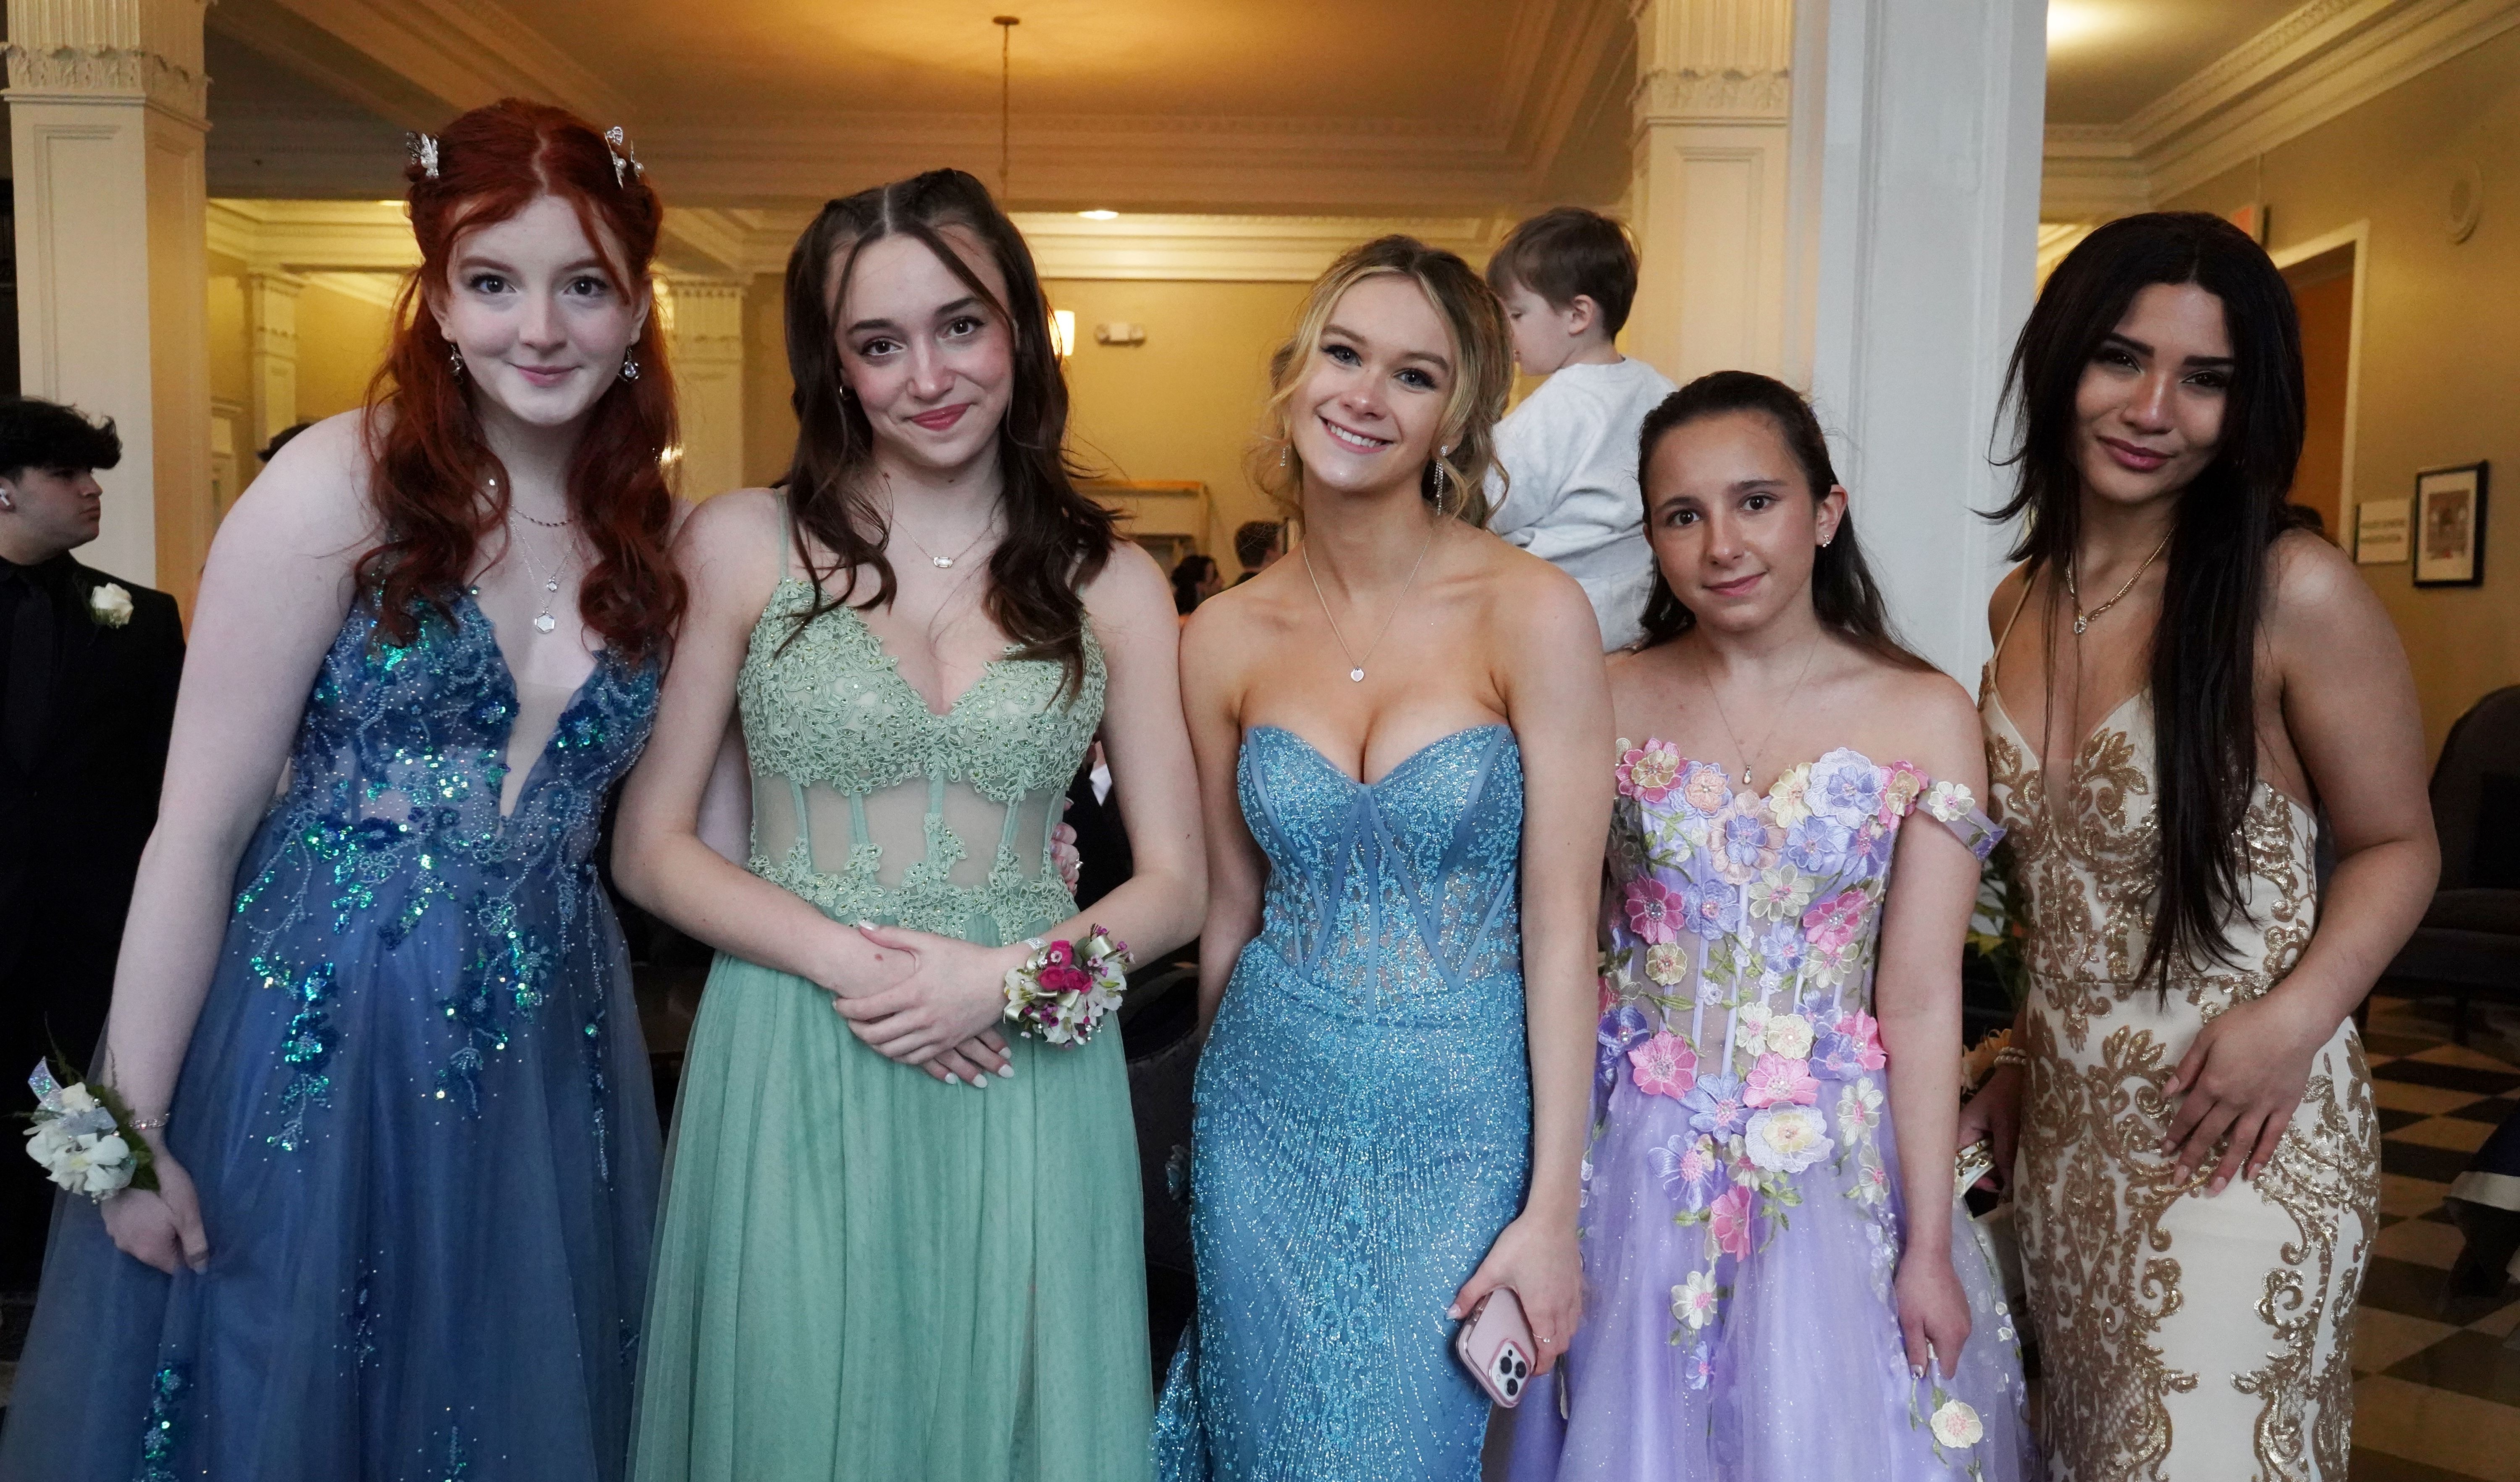 High school students dressed up for prom.